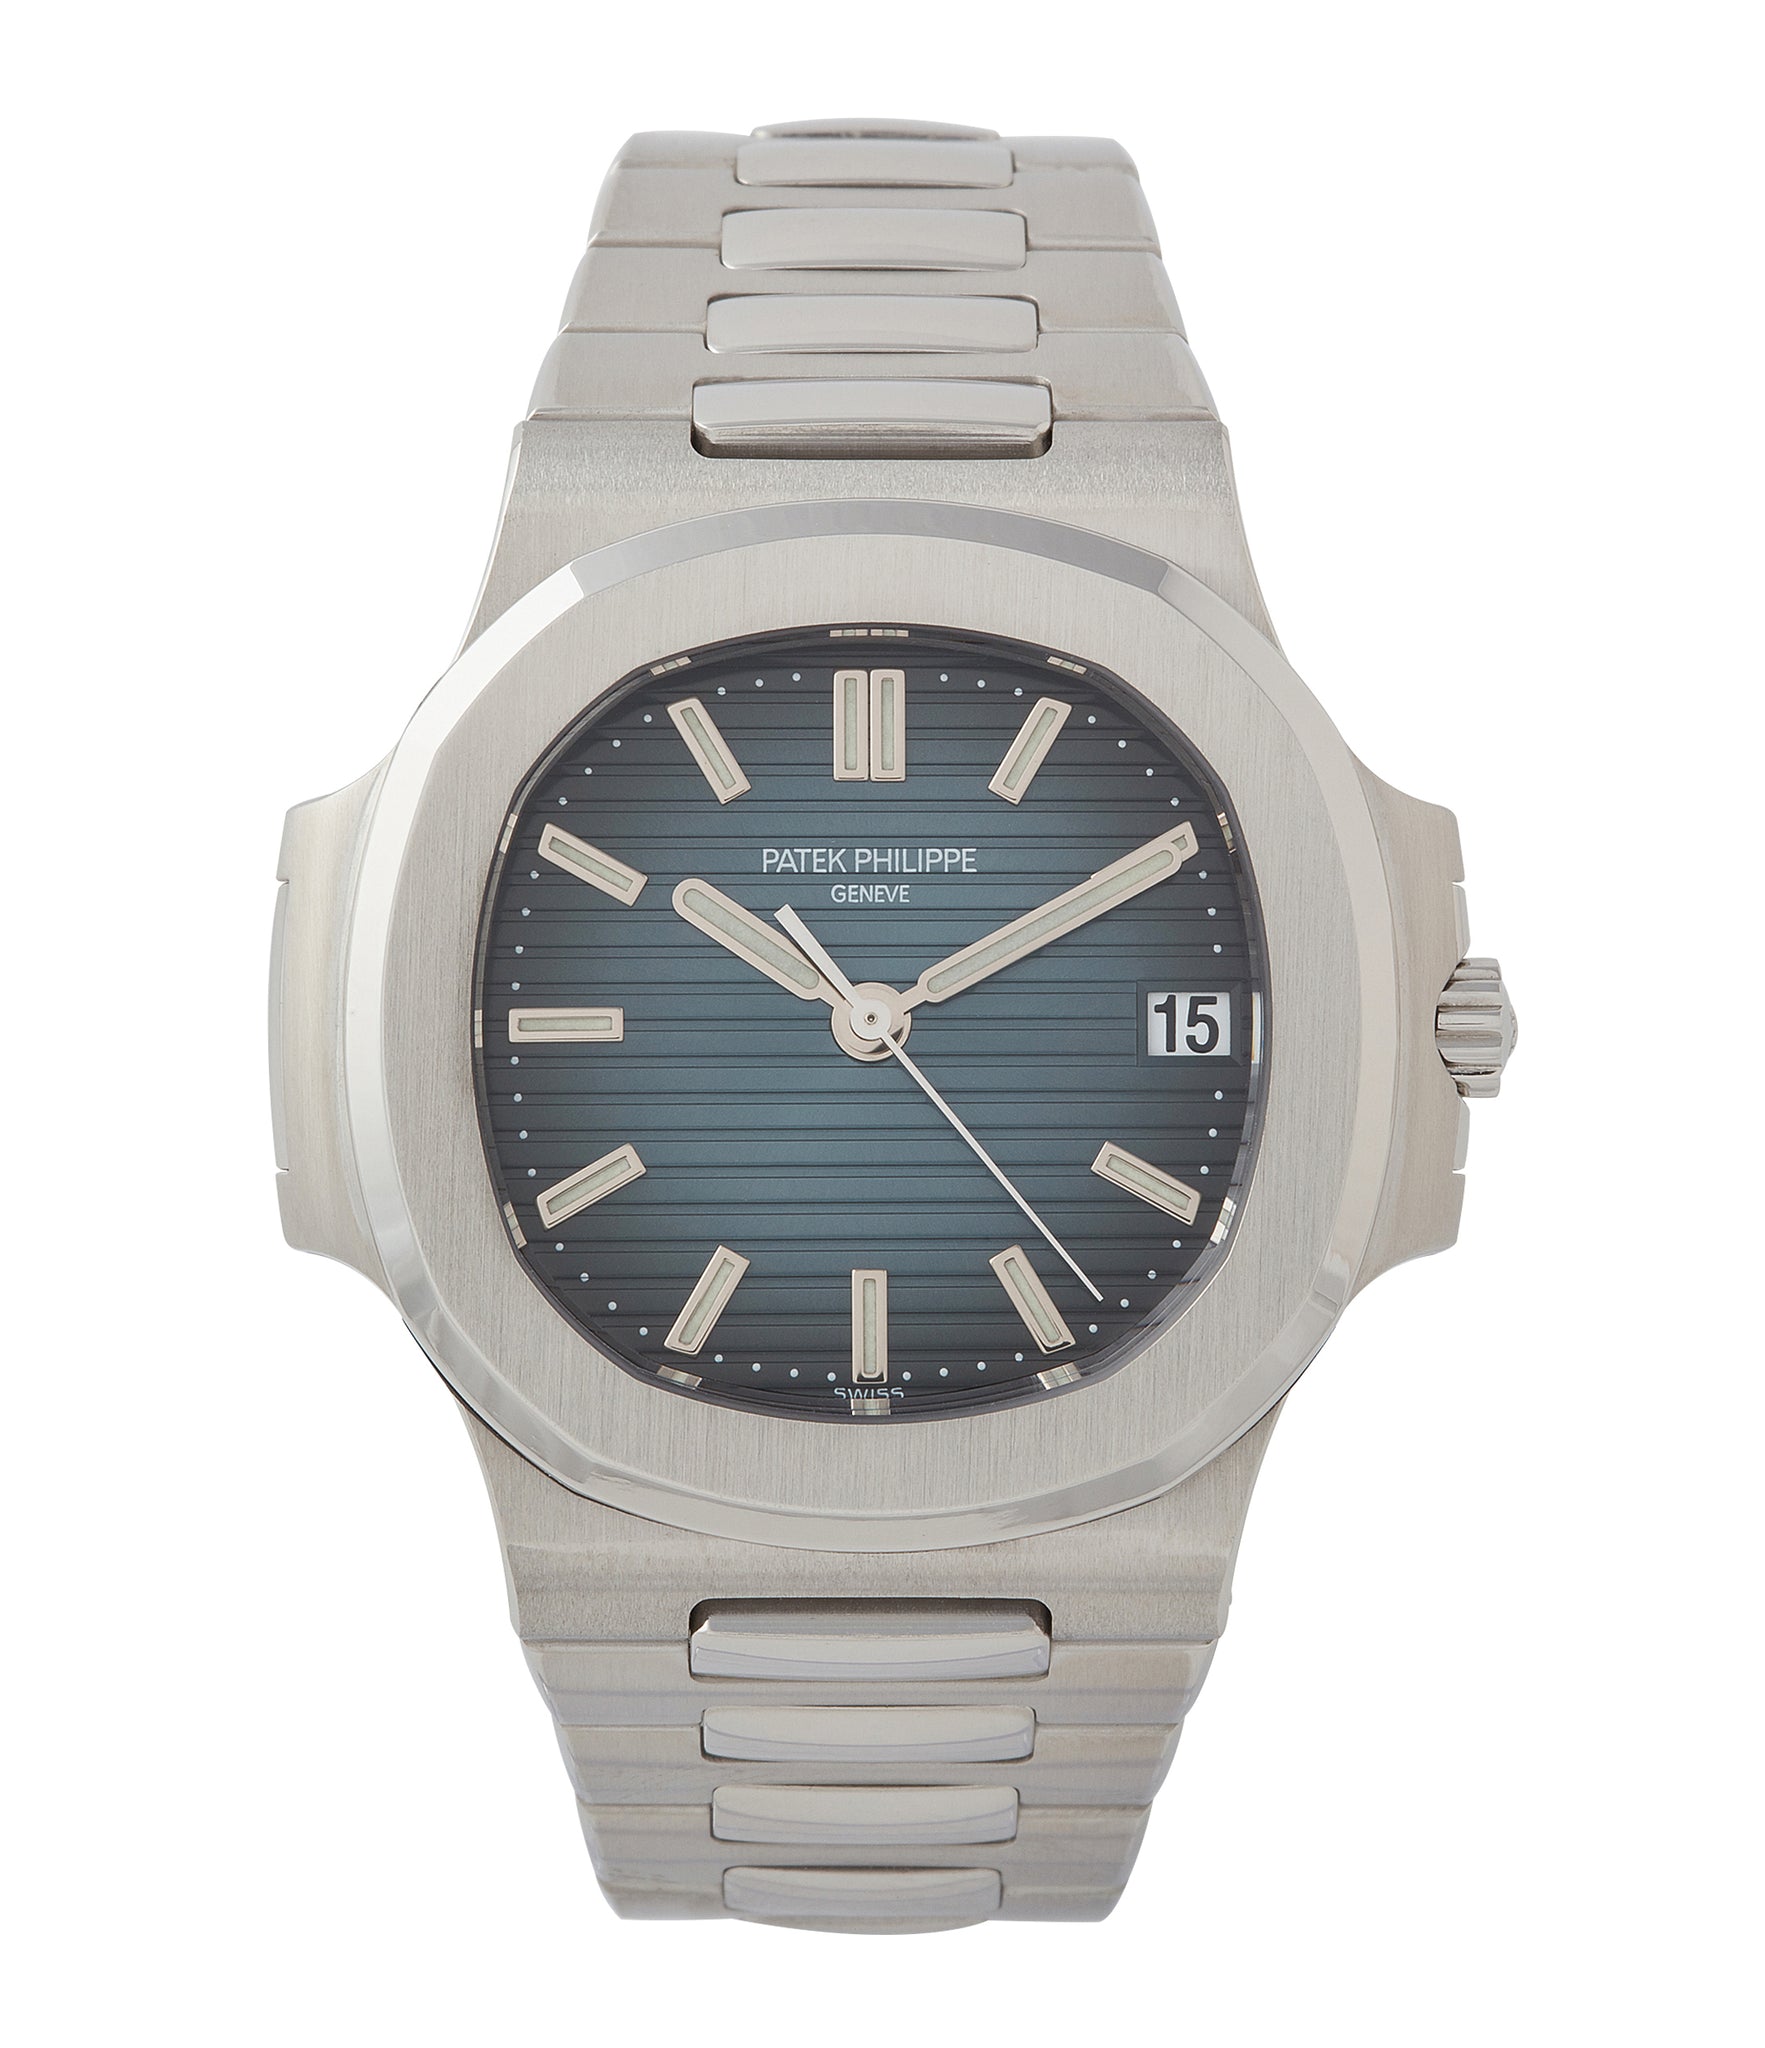 sell Patek Philippe Nautilus watch online to A Collected Man, online specialist of rare pre-owned watches